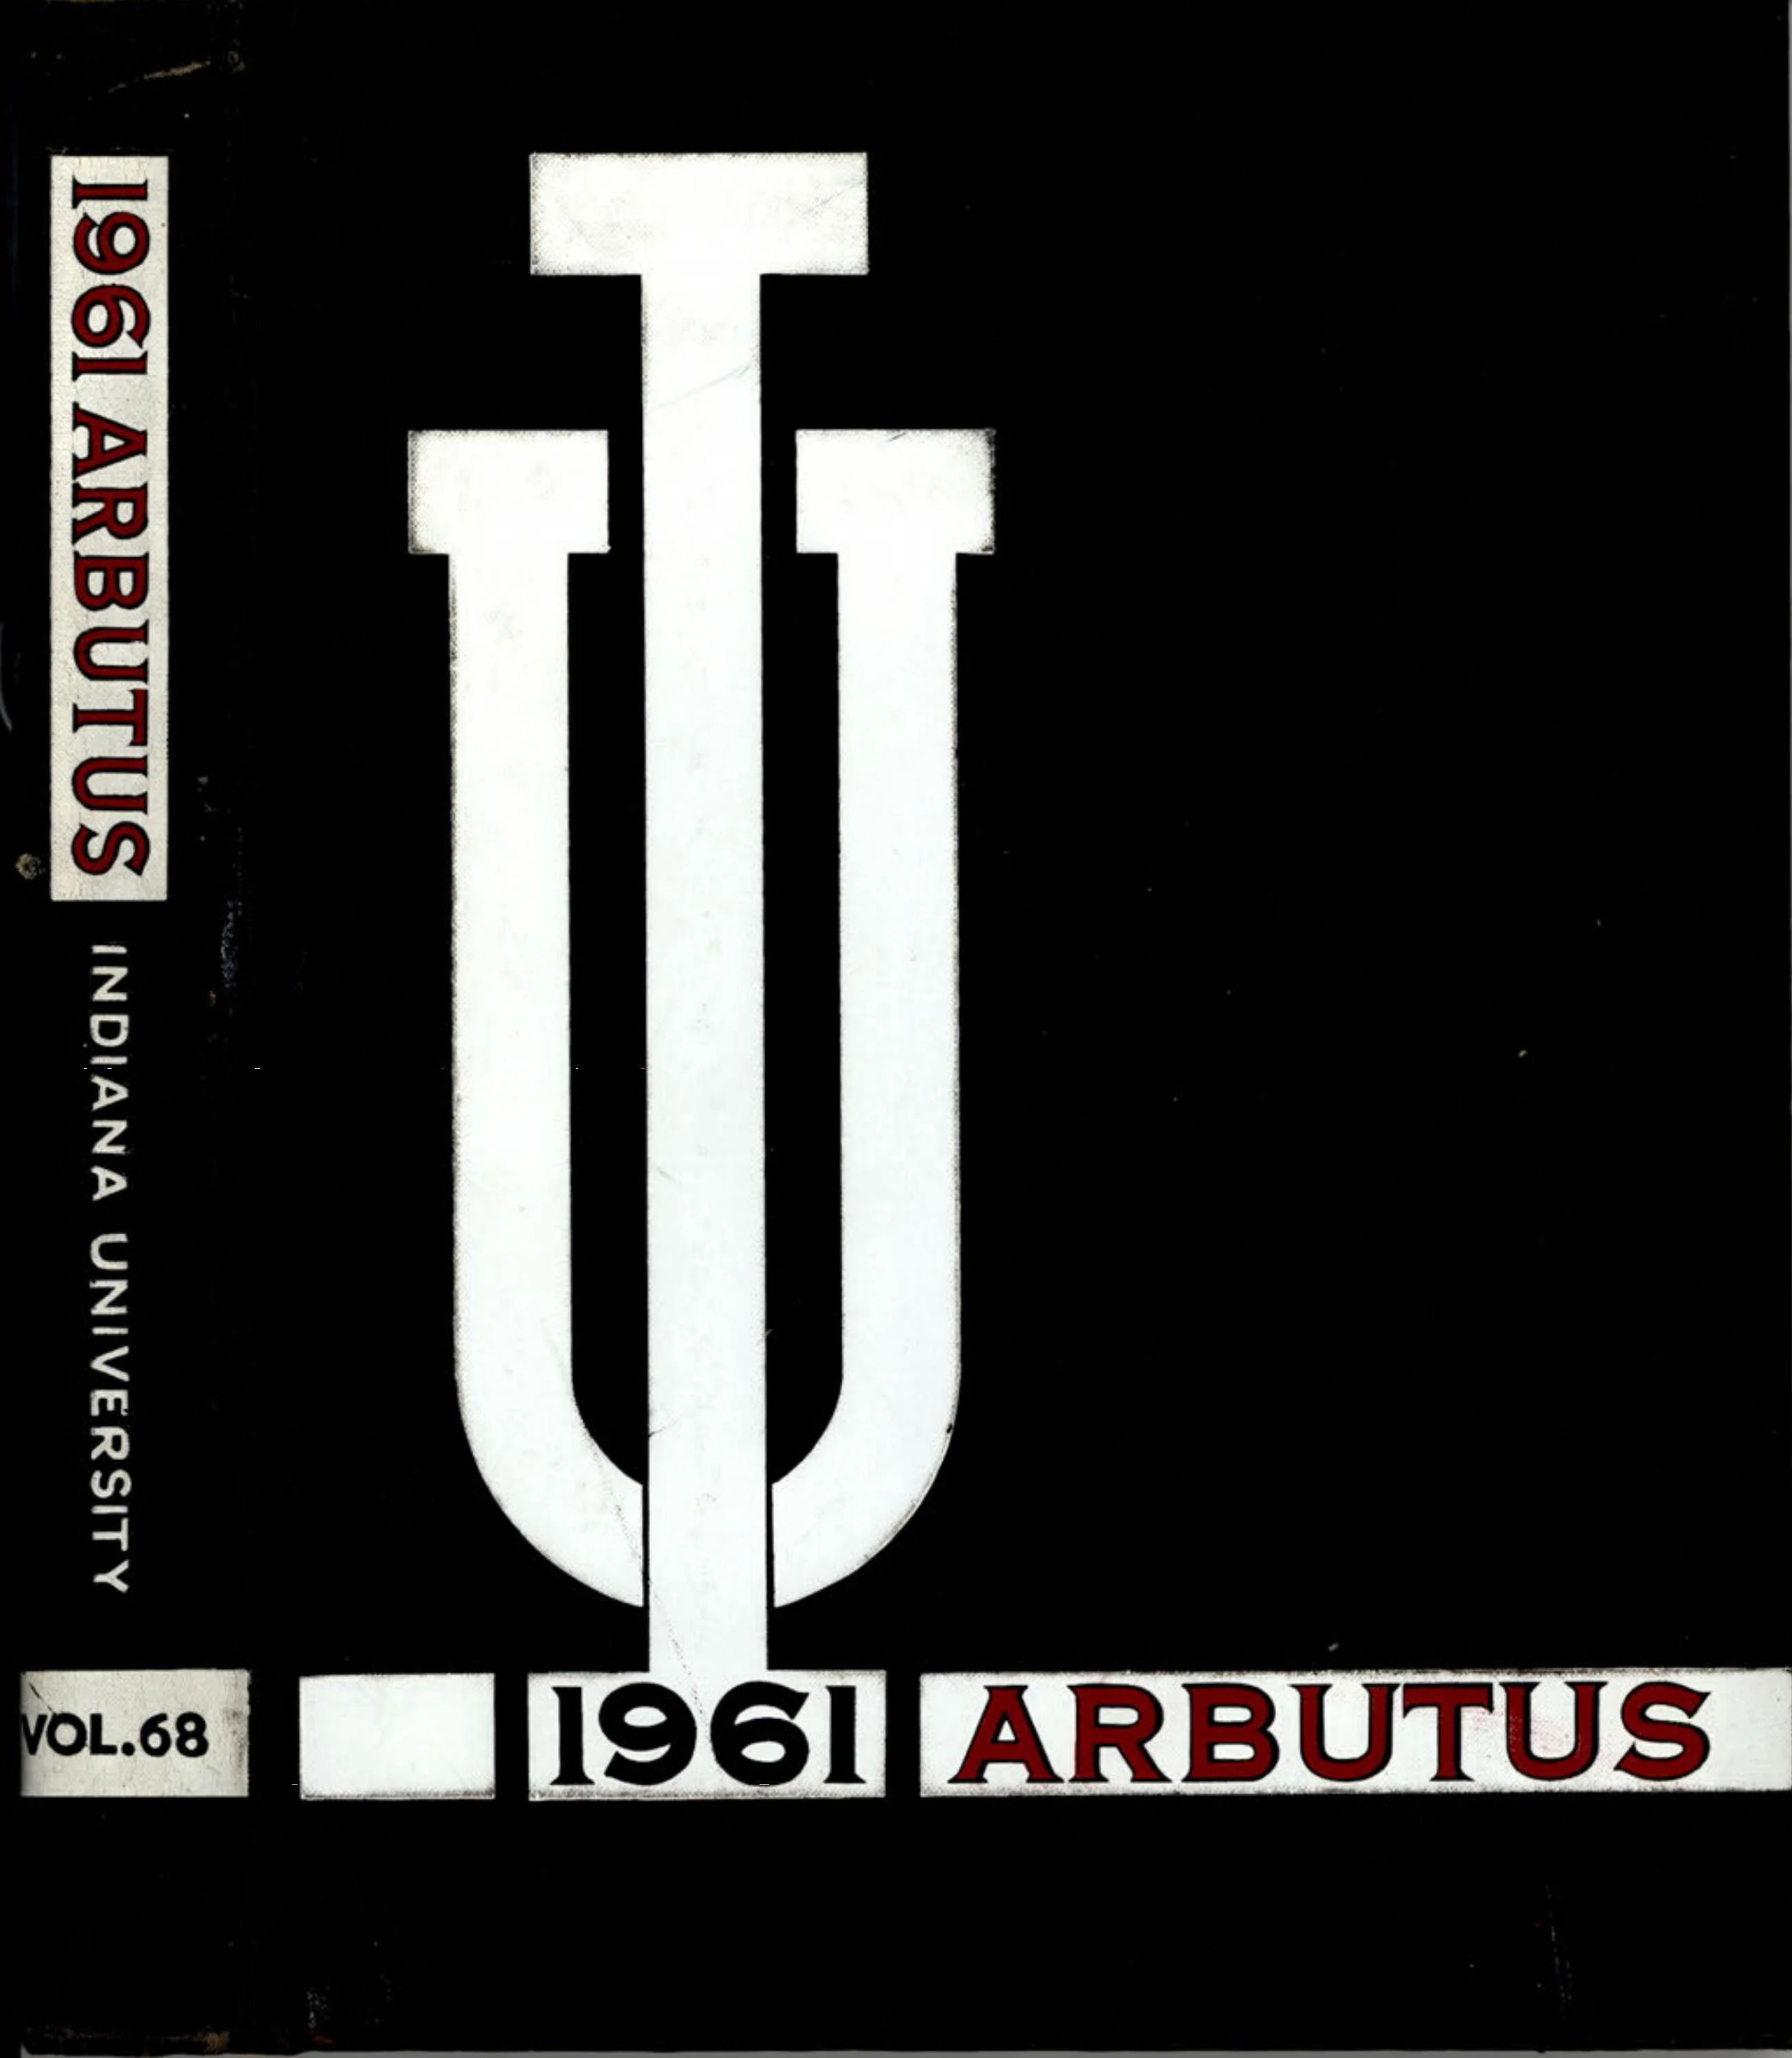 1961 Arbutus Yearbook by arbutusyearbook - Issuu